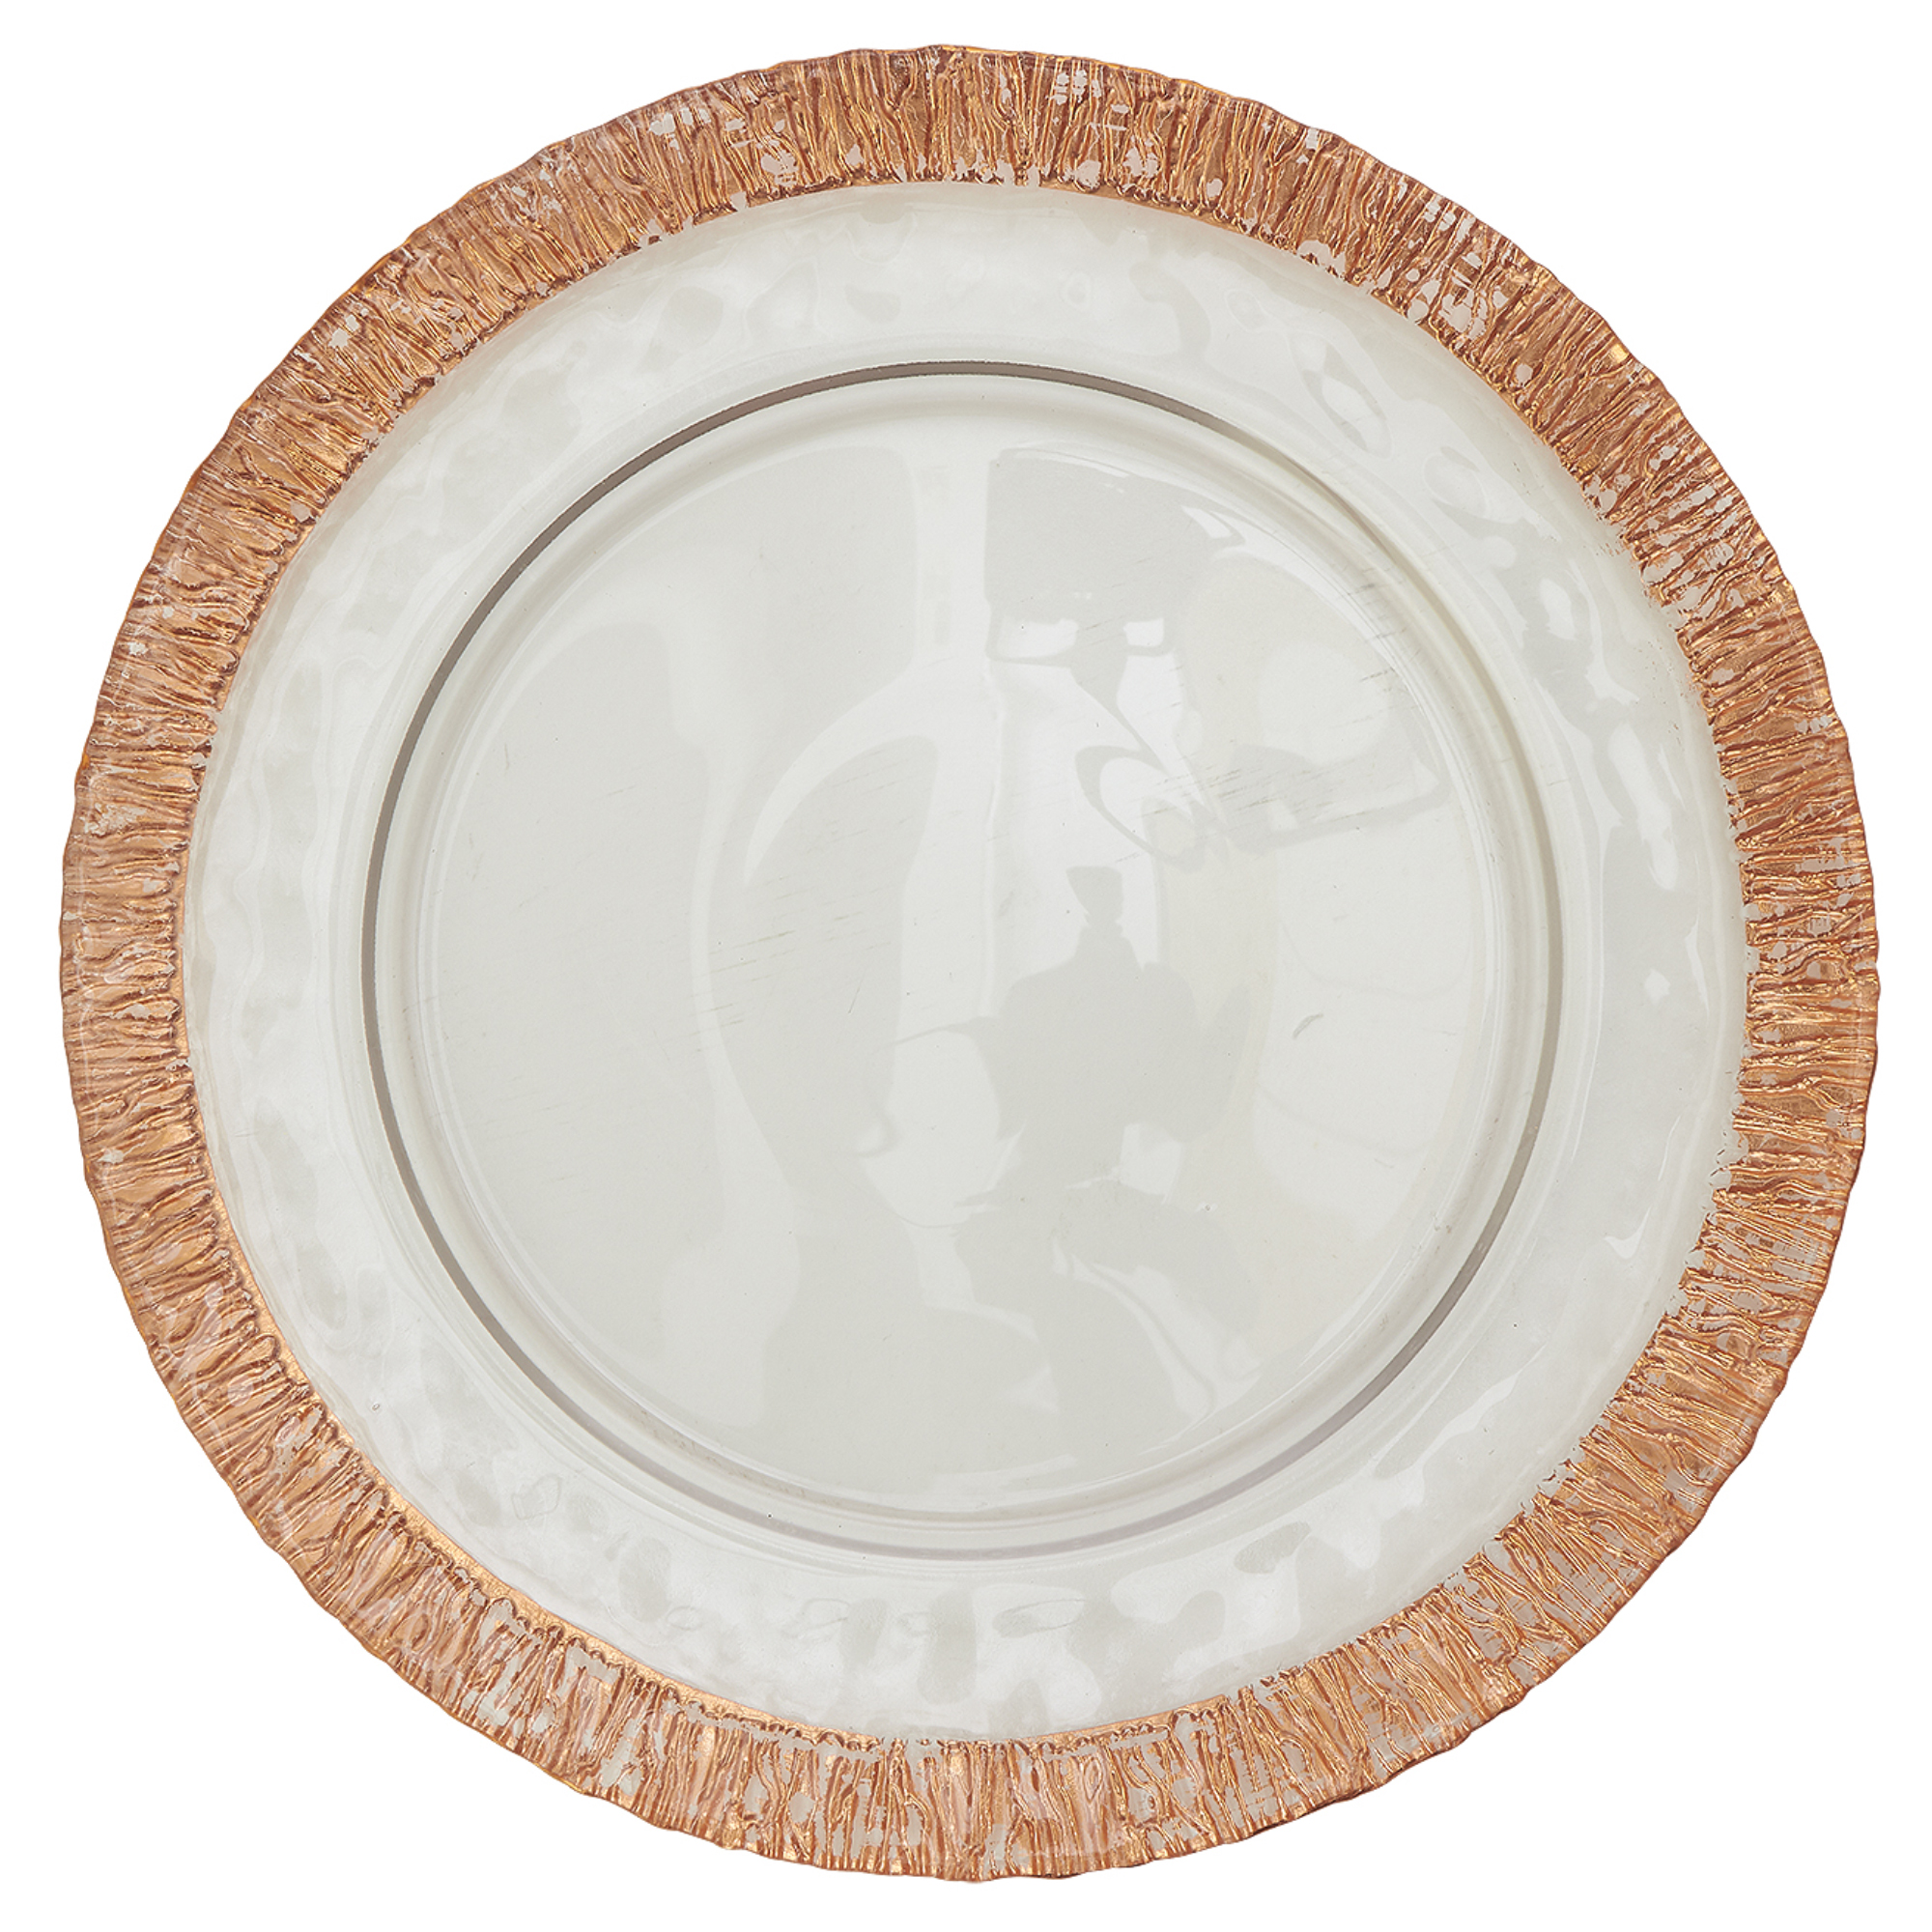 Wood Grain Edge Glass Charger Plate 13" - Rose Gold